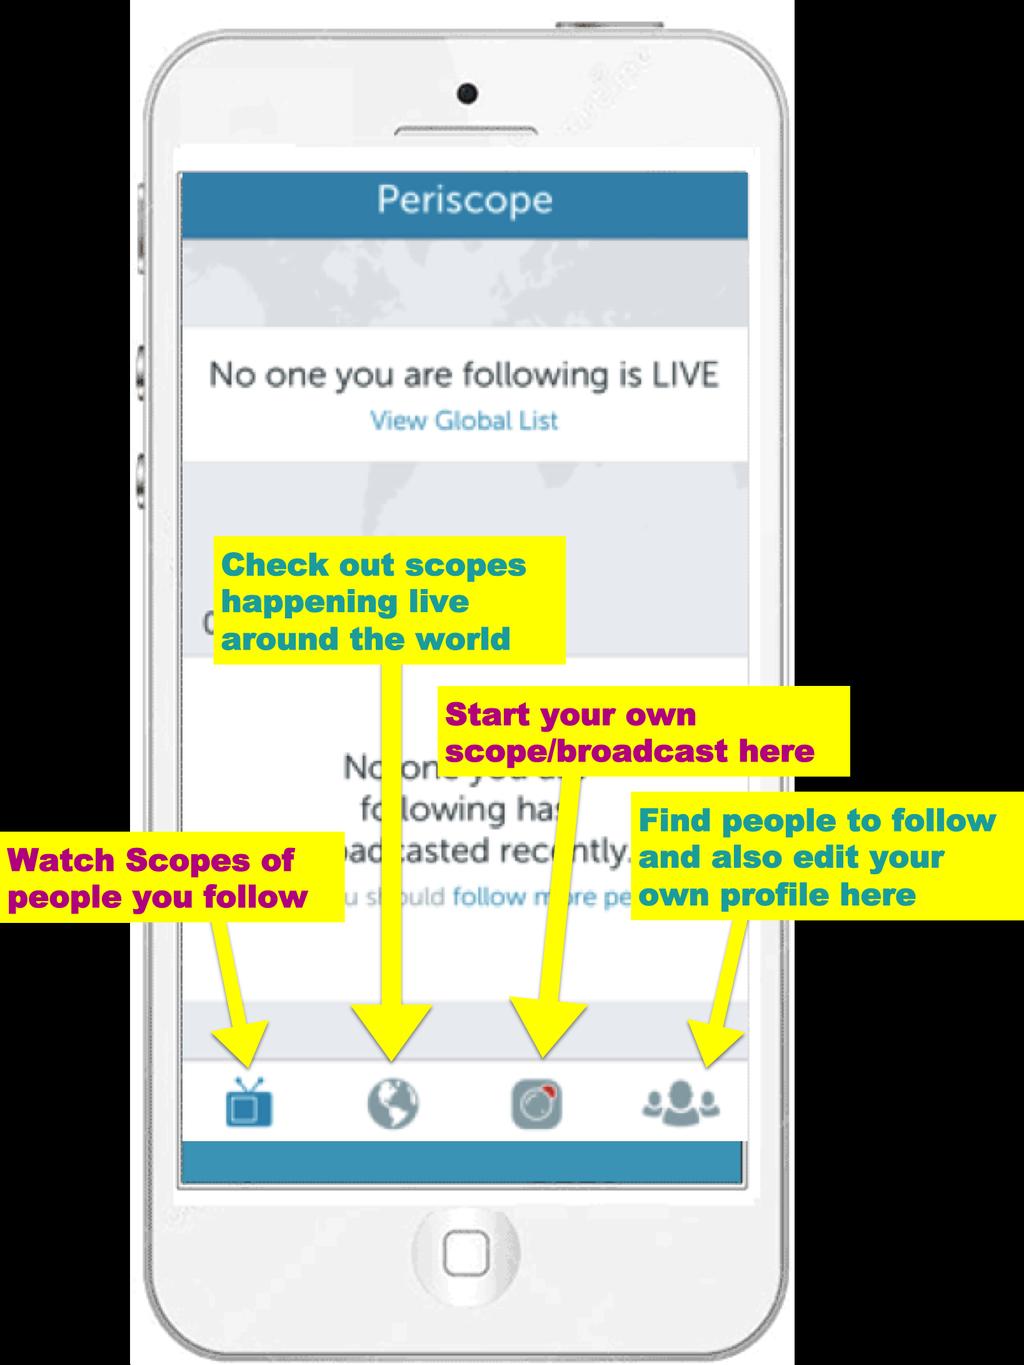 Getting Started iphone Users: Go to the App store and download Periscope: https://itunes.apple.com/us/app/periscope/id972909677?